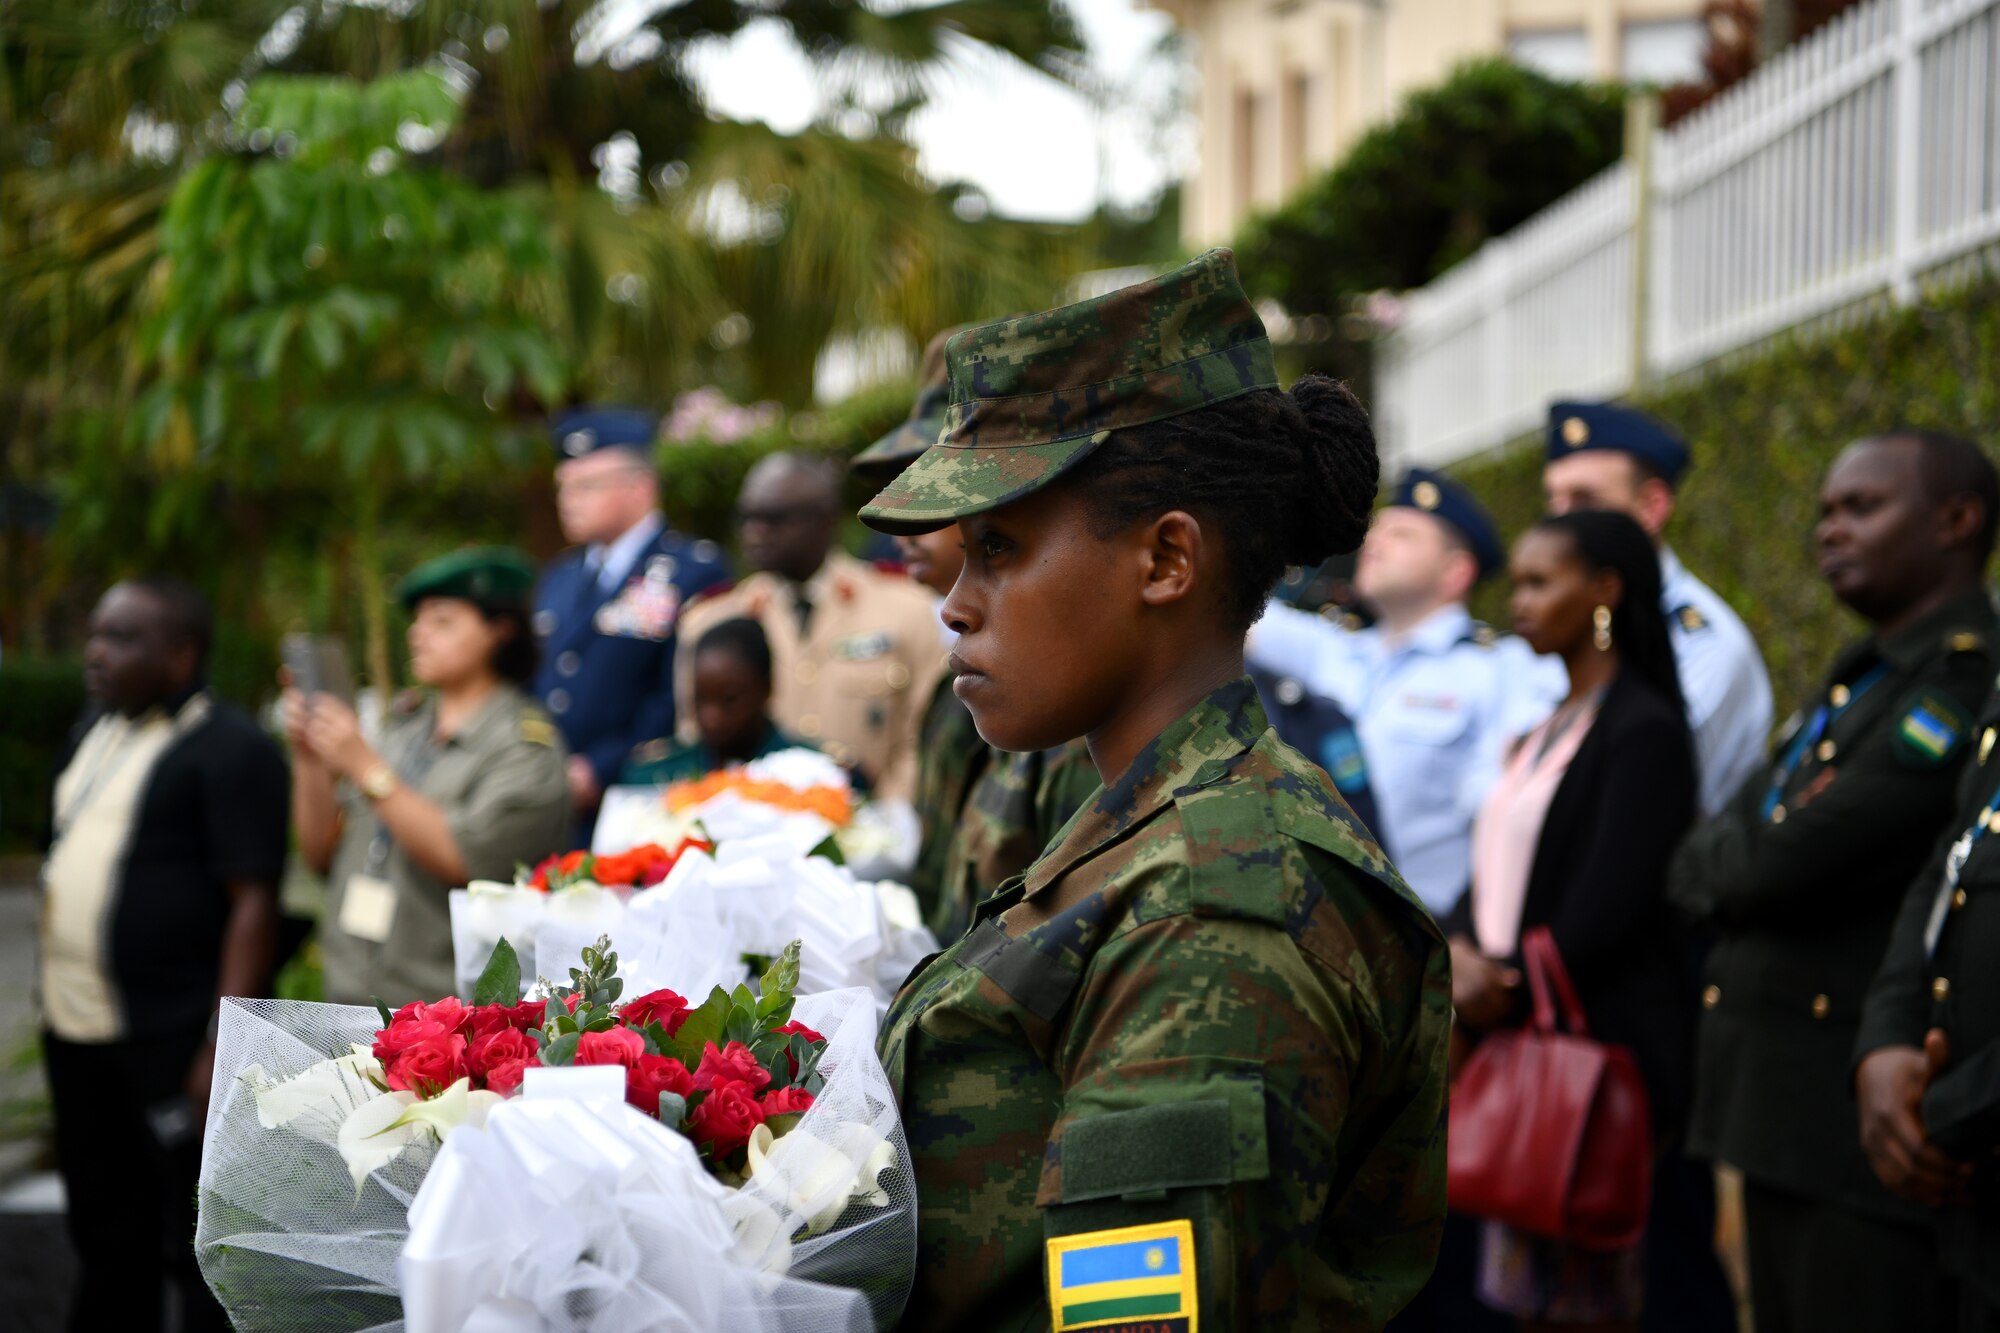 U.S. Air Force Airmen and delegates from over 24 African partner nations visit the Kigali Genocide Memorial in Kigali, Rwanda on May 22, 2019. There were 115 participants at the African Partner Outbreak Response Alliance (APORA) conference and several got an opportunity to visit the memorial. During APORA, military and civilian leaders worked together to align best practices and improve response capabilities for potential outbreaks of contagious diseases. The training bolstered relationships with current partners and mobilize new partners to strengthen pandemic prevention programs. (U.S. Air Force photo by Master Sgt. Andy M. Kin)